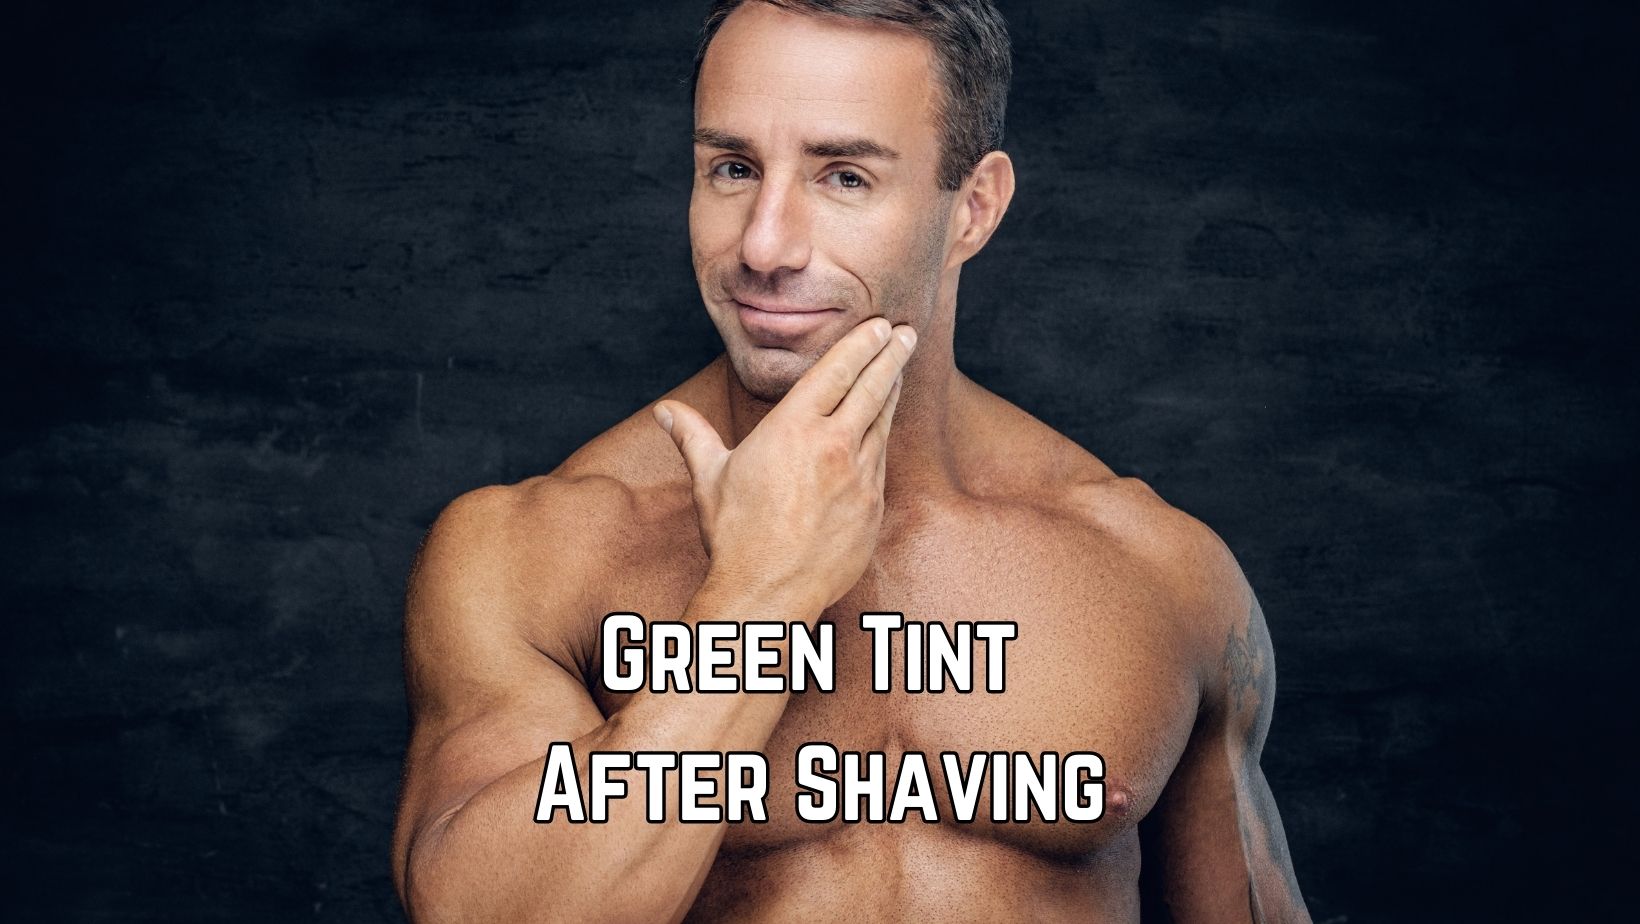 Green tint after shaving